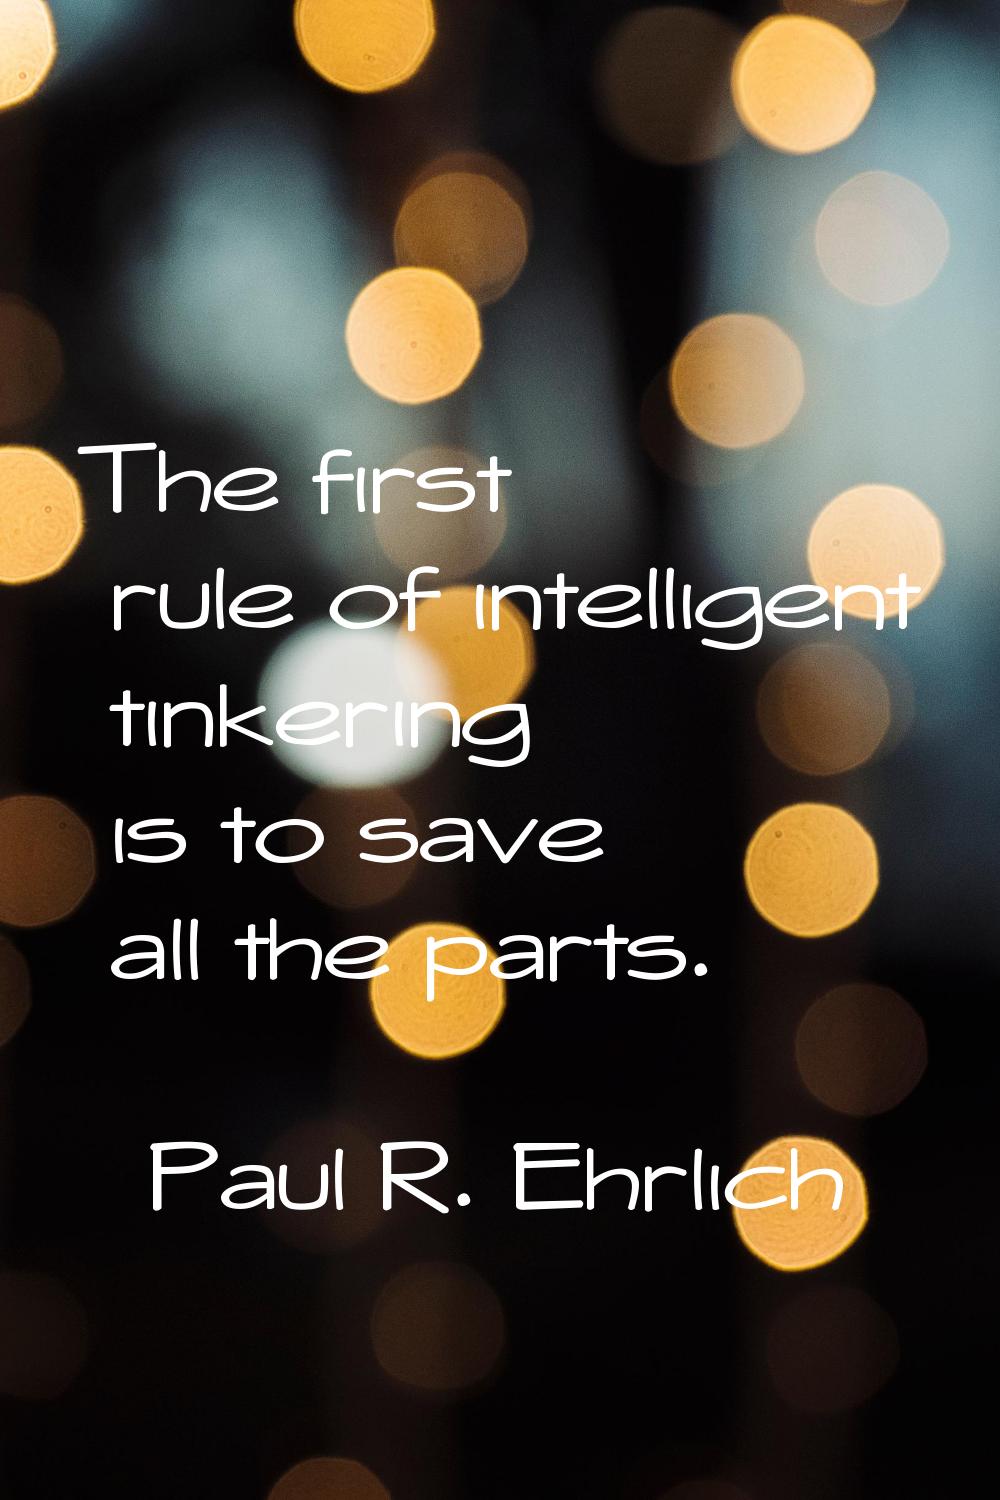 The first rule of intelligent tinkering is to save all the parts.